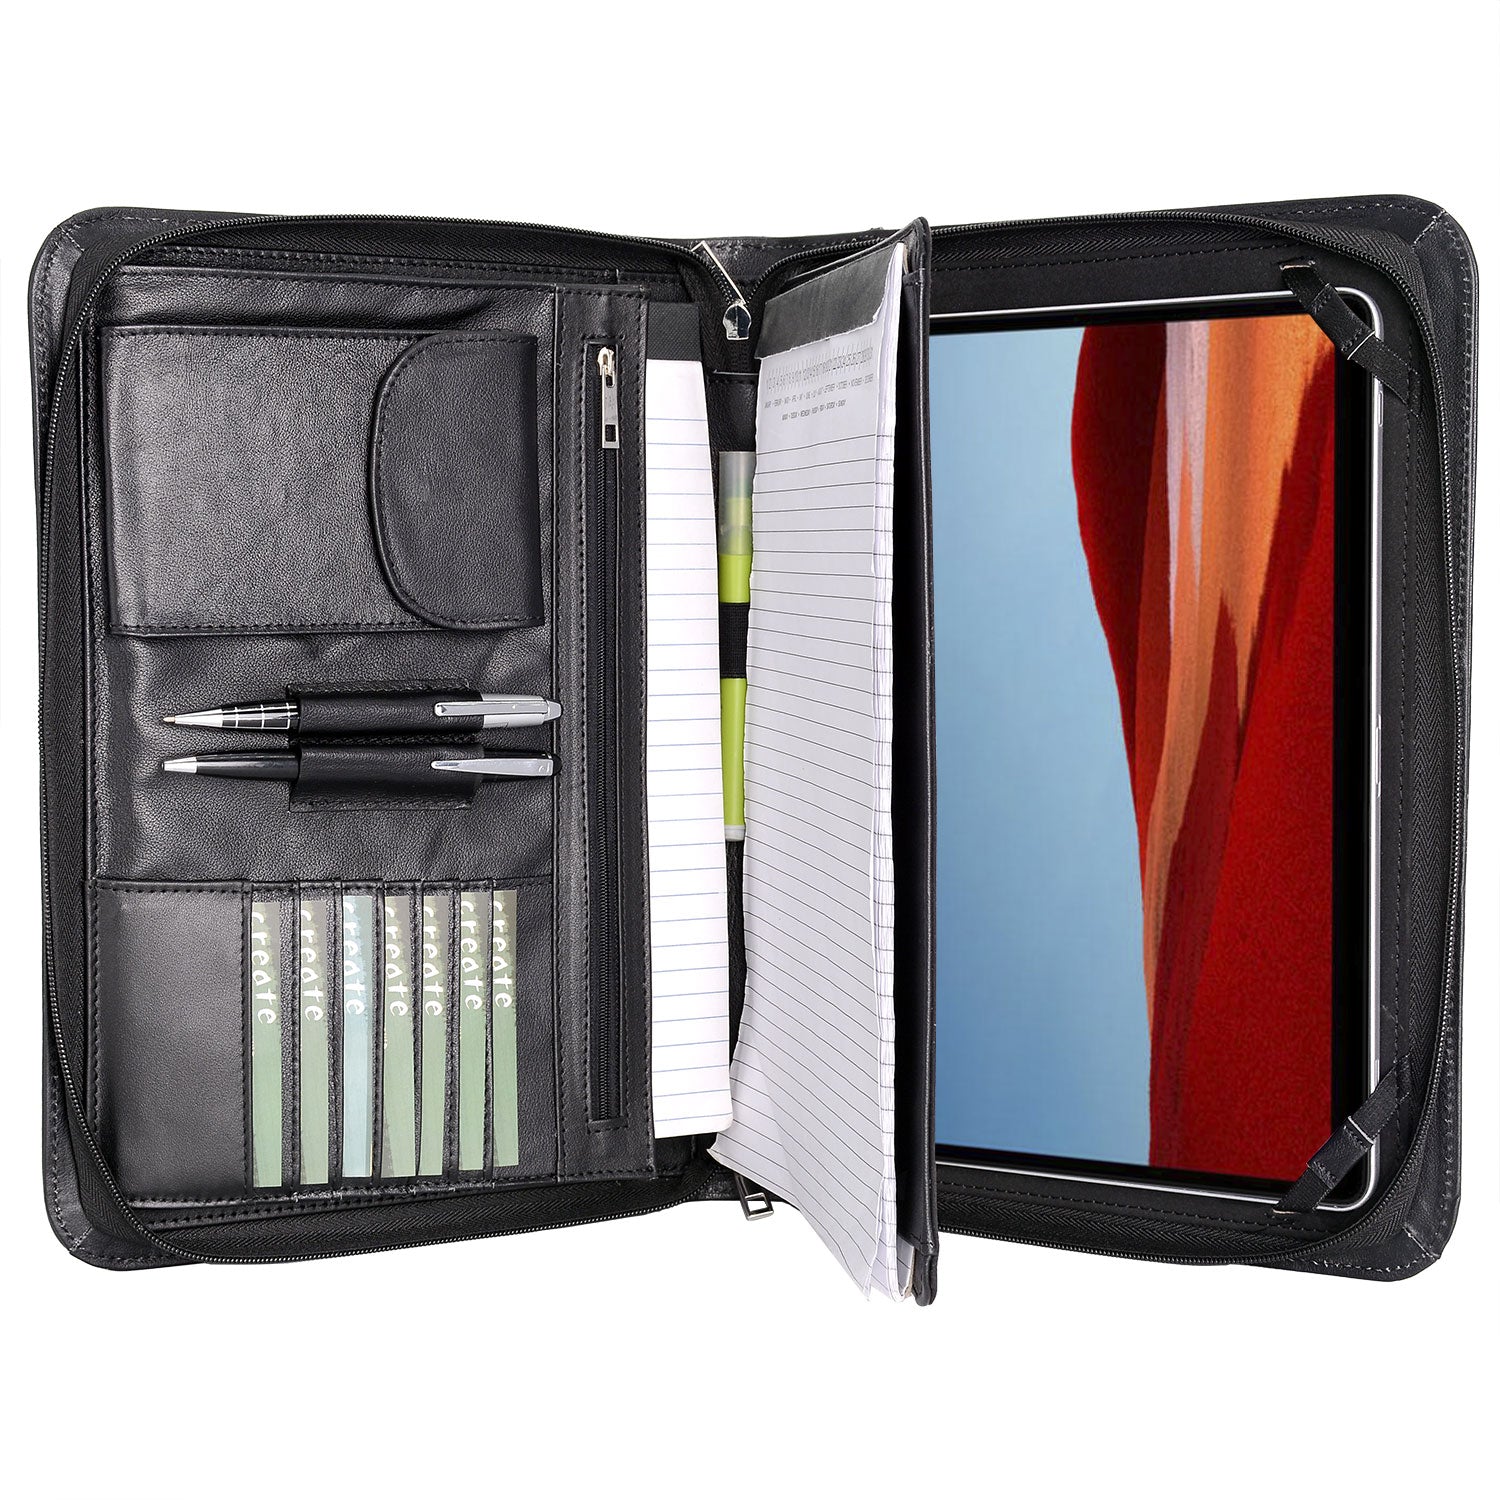 Leather Organizer Padfolio with Handle and Pocket, Zipper Leather